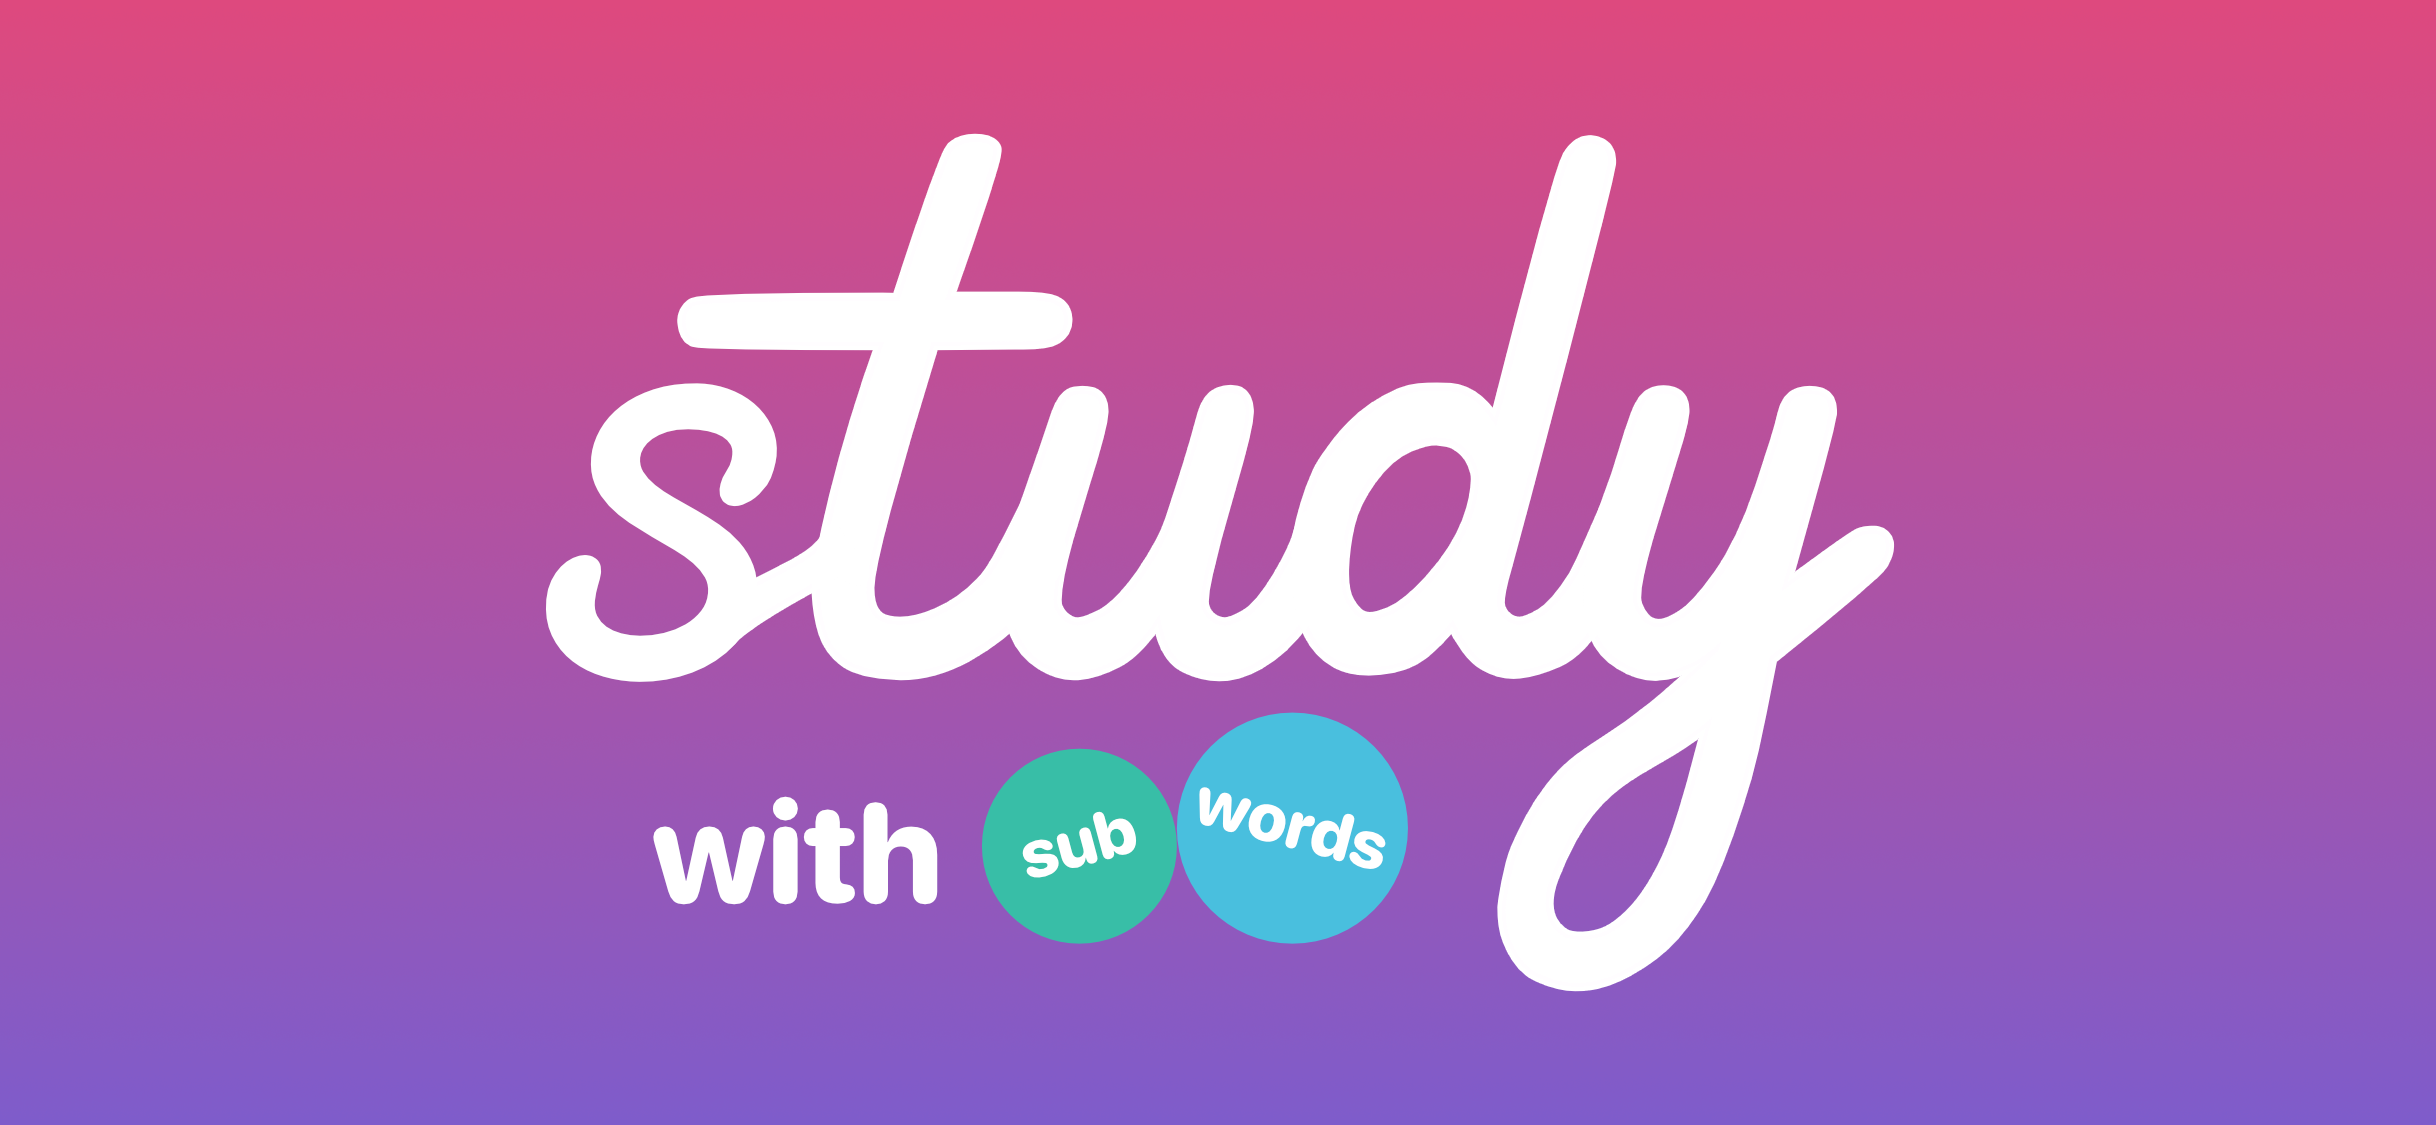 Study with Subwords